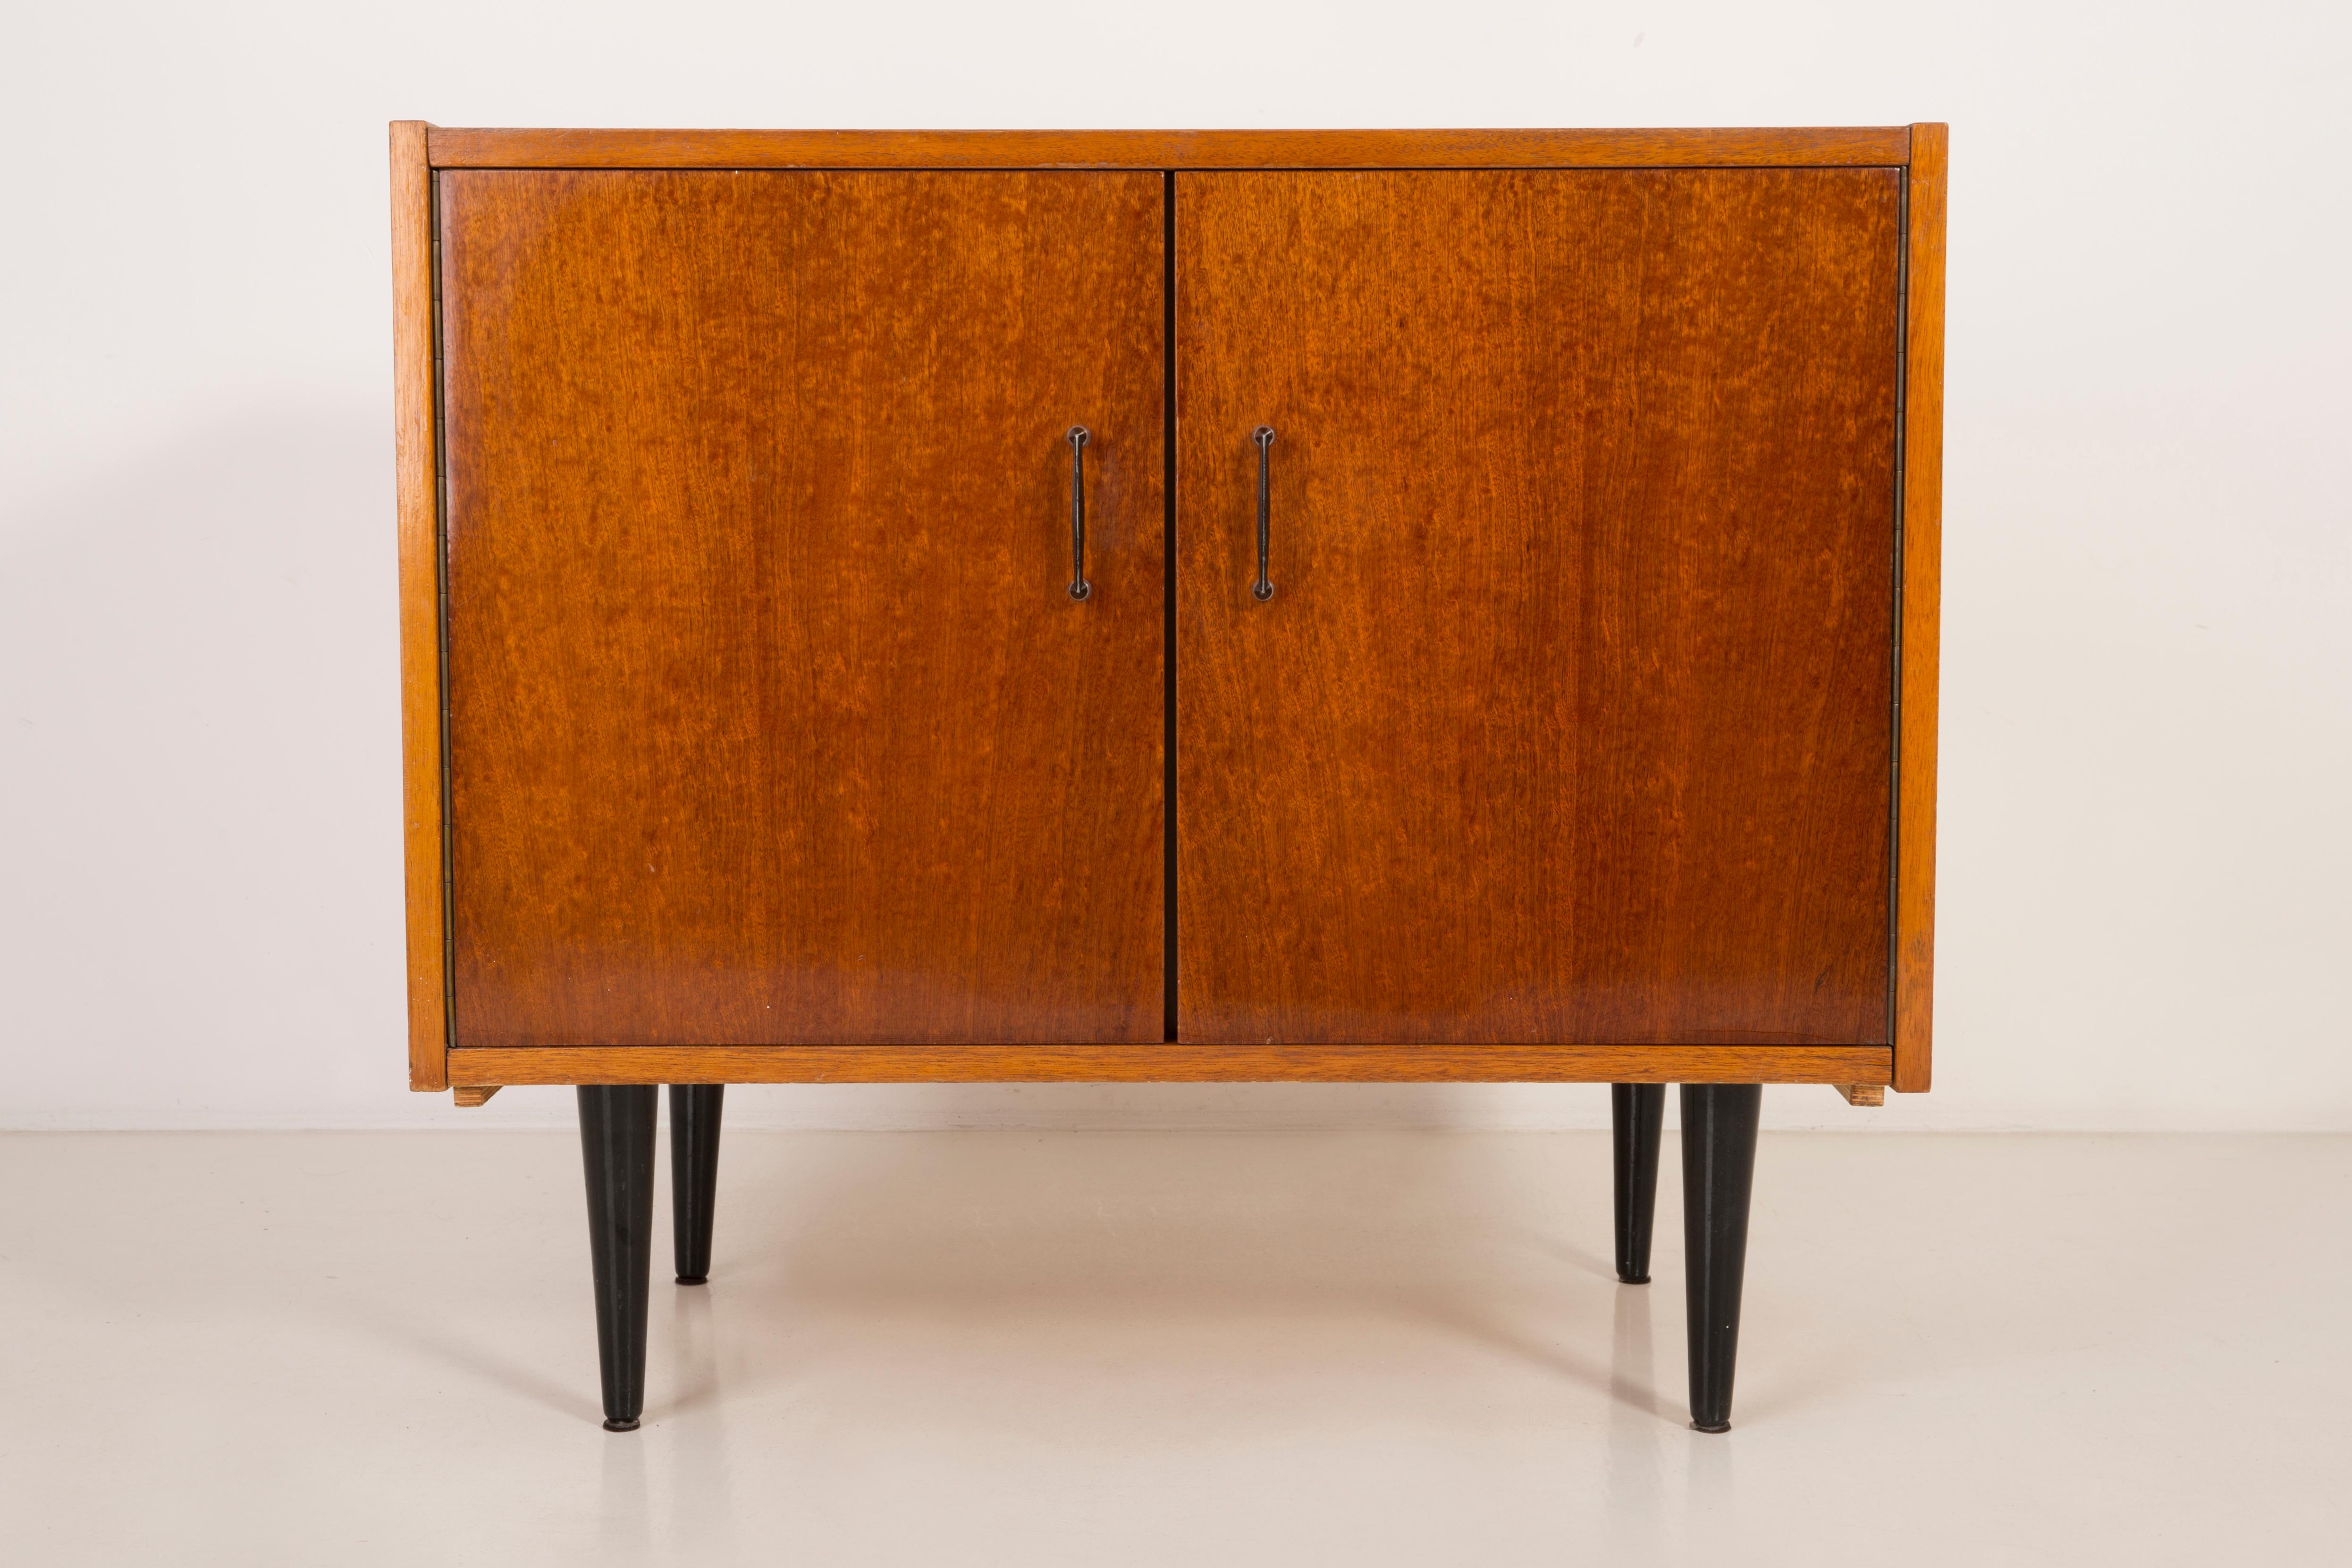 Set of Three Mid-Century Modern Vintage Sideboards, Wood, Poland, 1960s For Sale 1